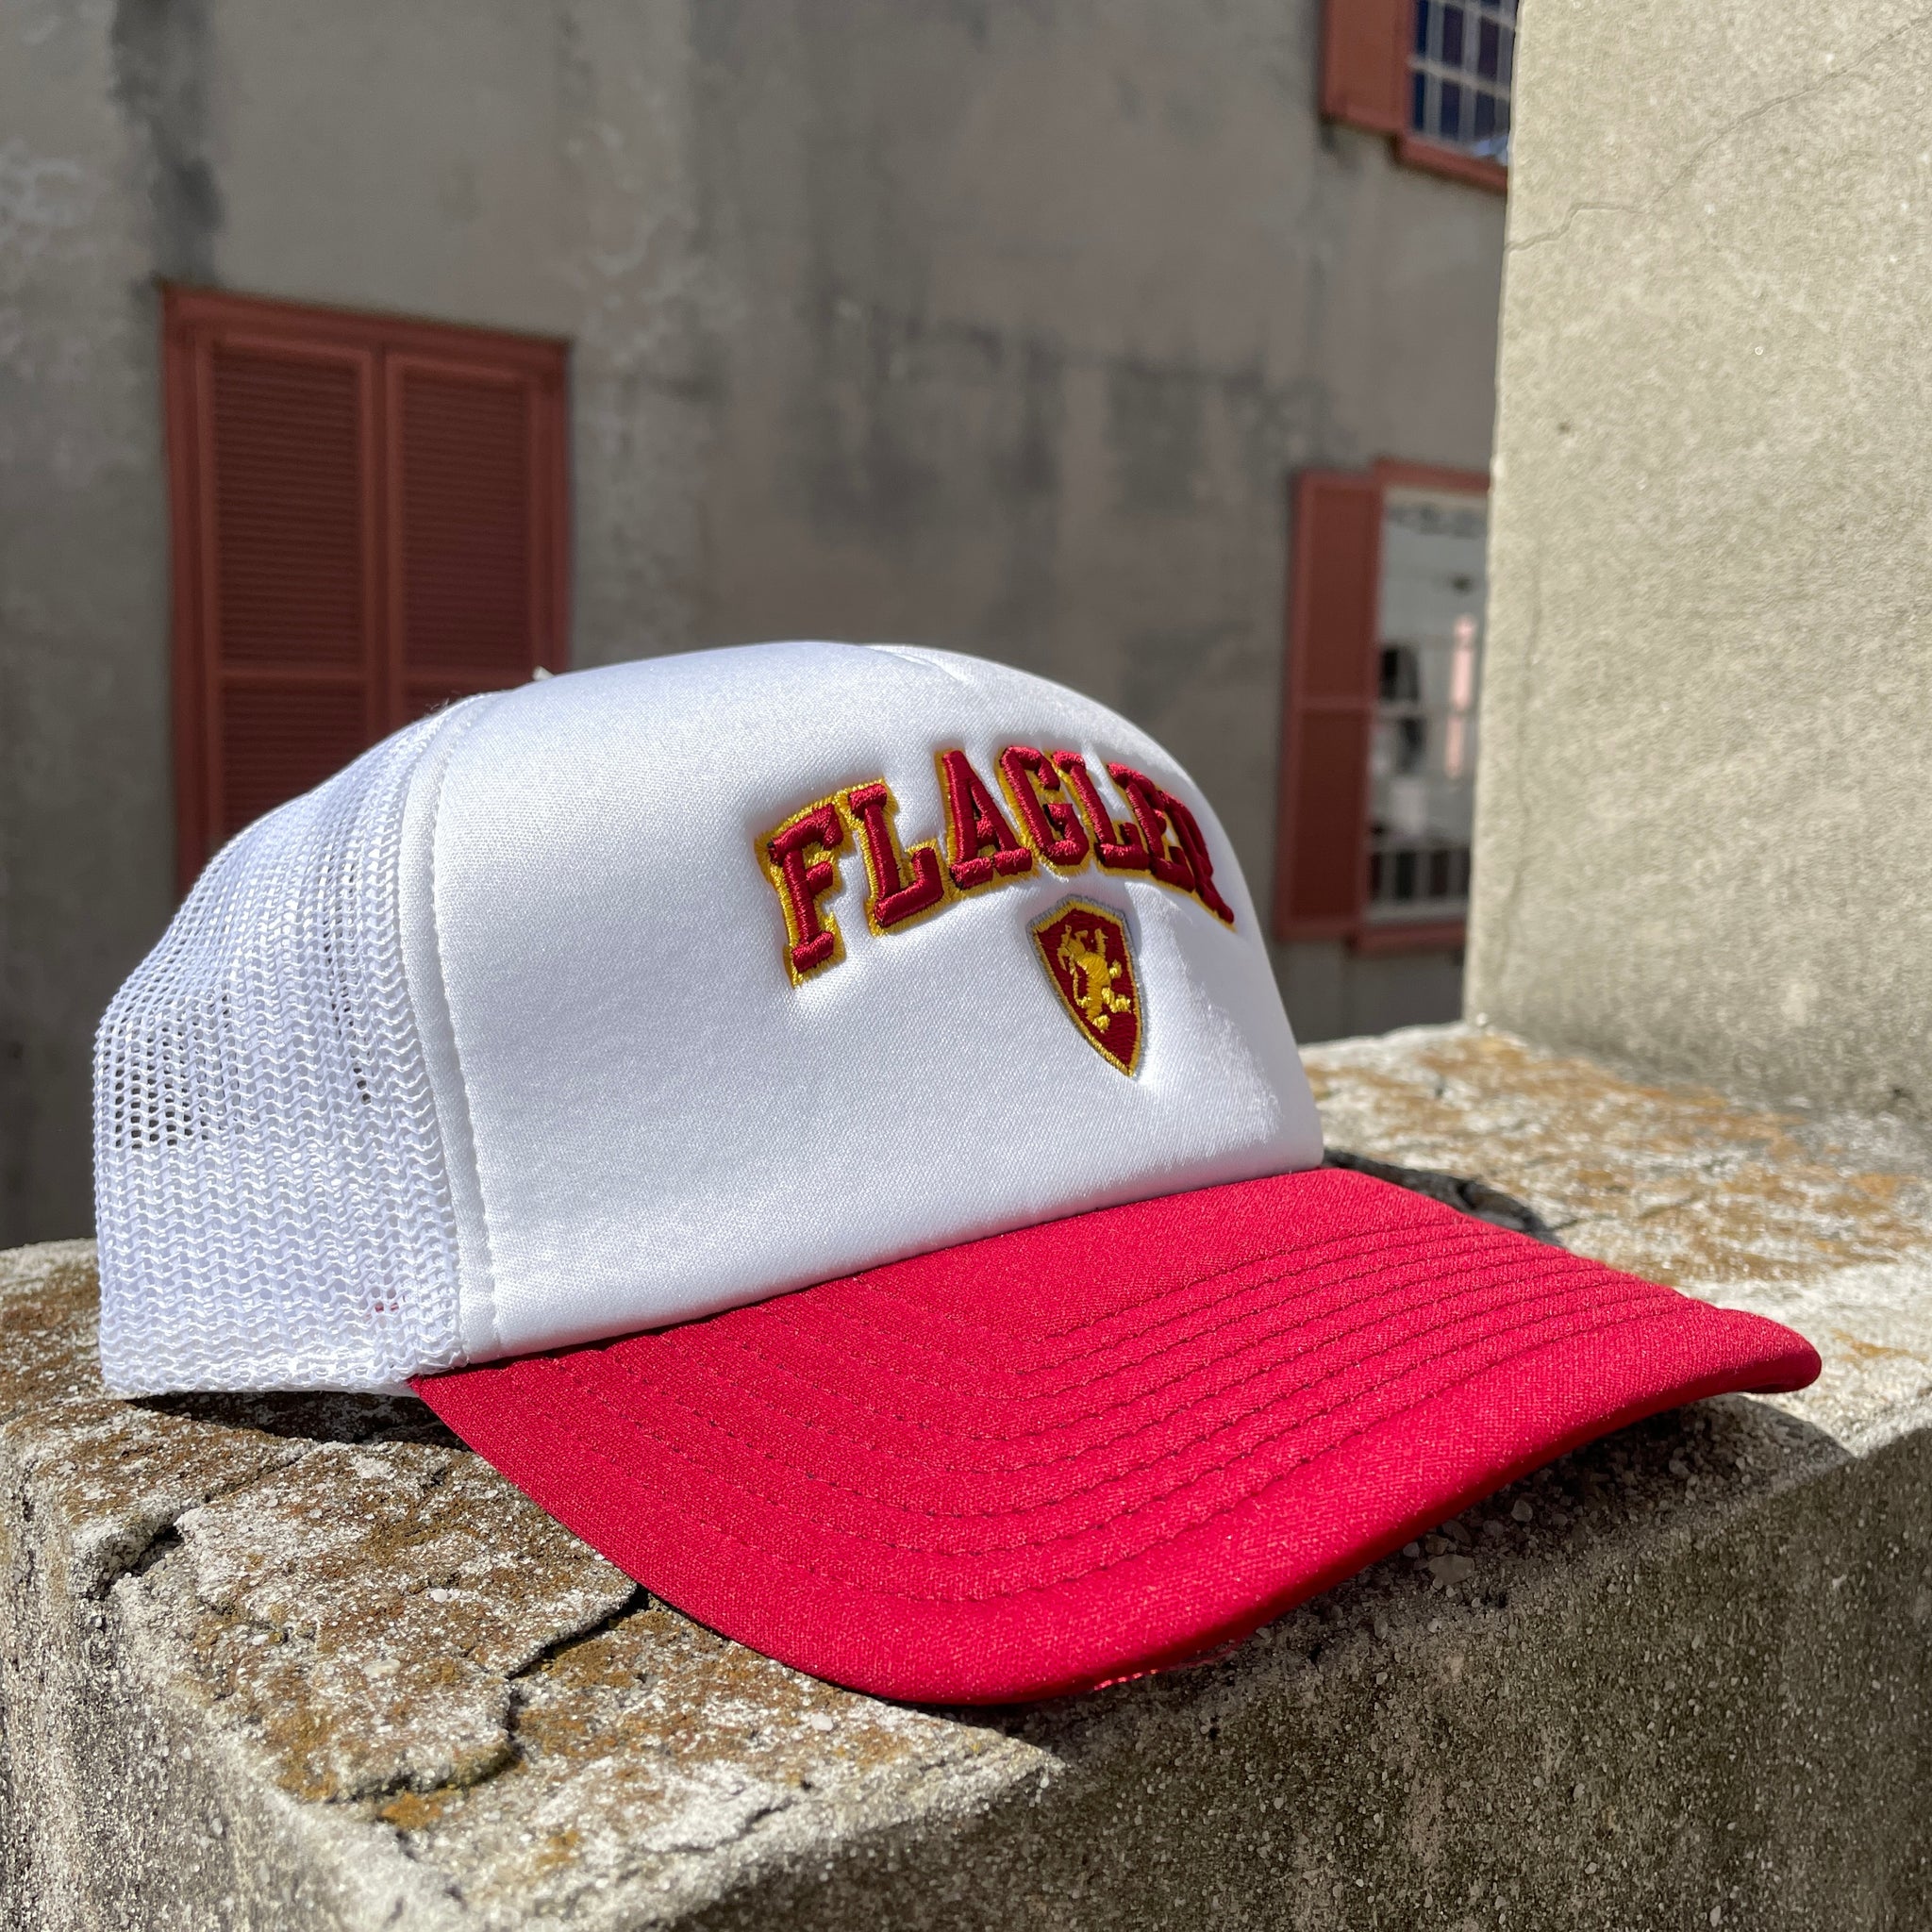 Red and White foam Trucker hat with red embroidering saying Flagler with yellow outline over Flagler shield logo